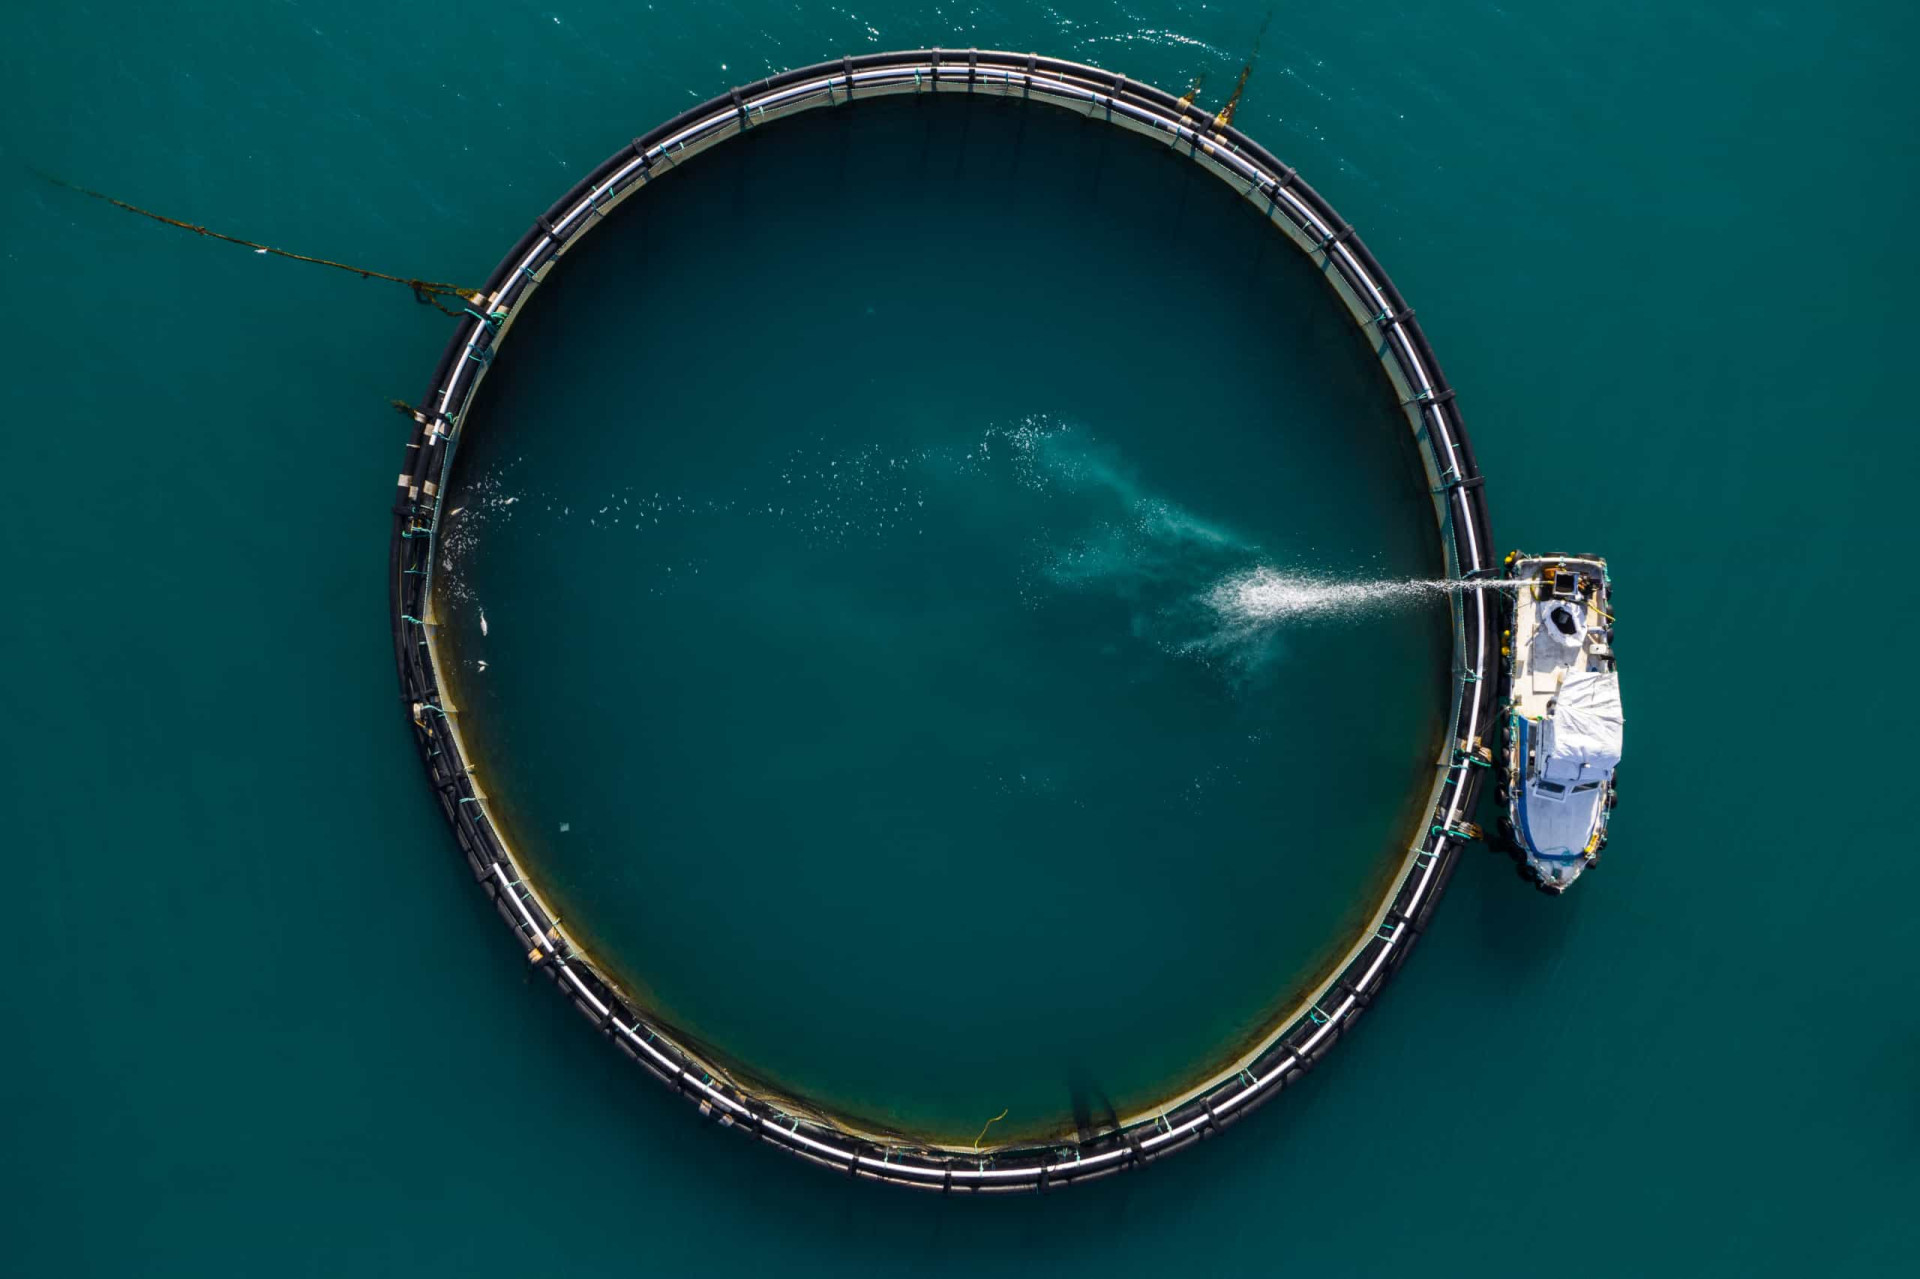 <p>The farming of Atlantic bluefin, a vulnerable species, is happening in the Mediterranean, North America, and Japan.</p><p><a href="https://www.msn.com/en-us/community/channel/vid-7xx8mnucu55yw63we9va2gwr7uihbxwc68fxqp25x6tg4ftibpra?cvid=94631541bc0f4f89bfd59158d696ad7e">Follow us and access great exclusive content every day</a></p>